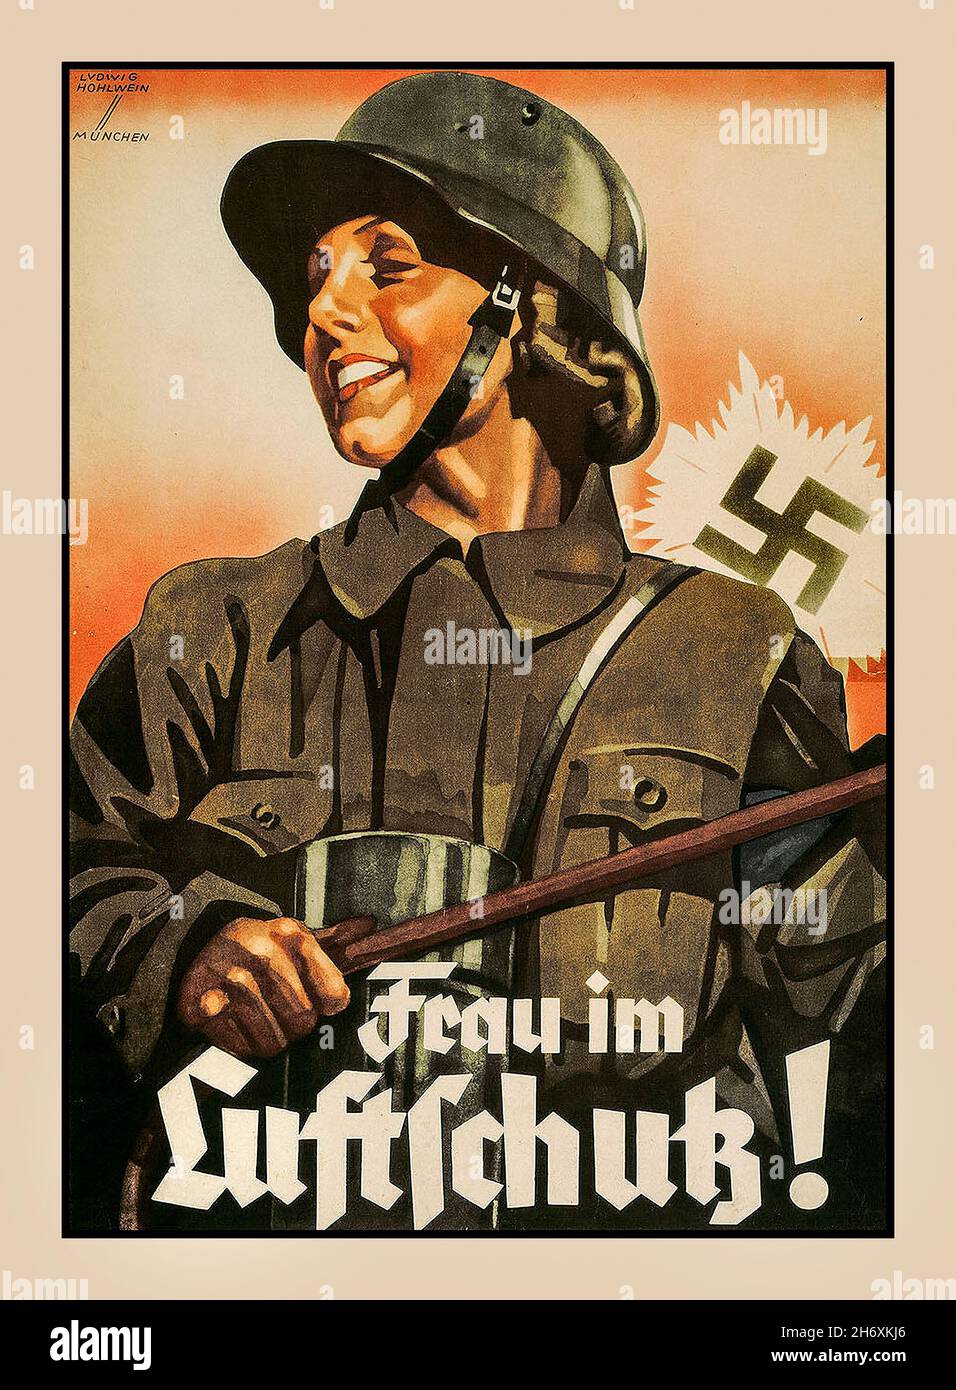 Nazi WW2 Propaganda recruitment poster 'Frau im Luftschutz' 'Woman in air raid protection' with rising sun and swastika emblem World War II  The Reichsluftschutzbund (RLB) (National Air Raid Protection League) was an organization in Nazi Germany in charge of air raid precautions in residential areas and among smaller businesses Nazi Germany Poster by Ludwig Hohlwein Munich Second World War Stock Photo